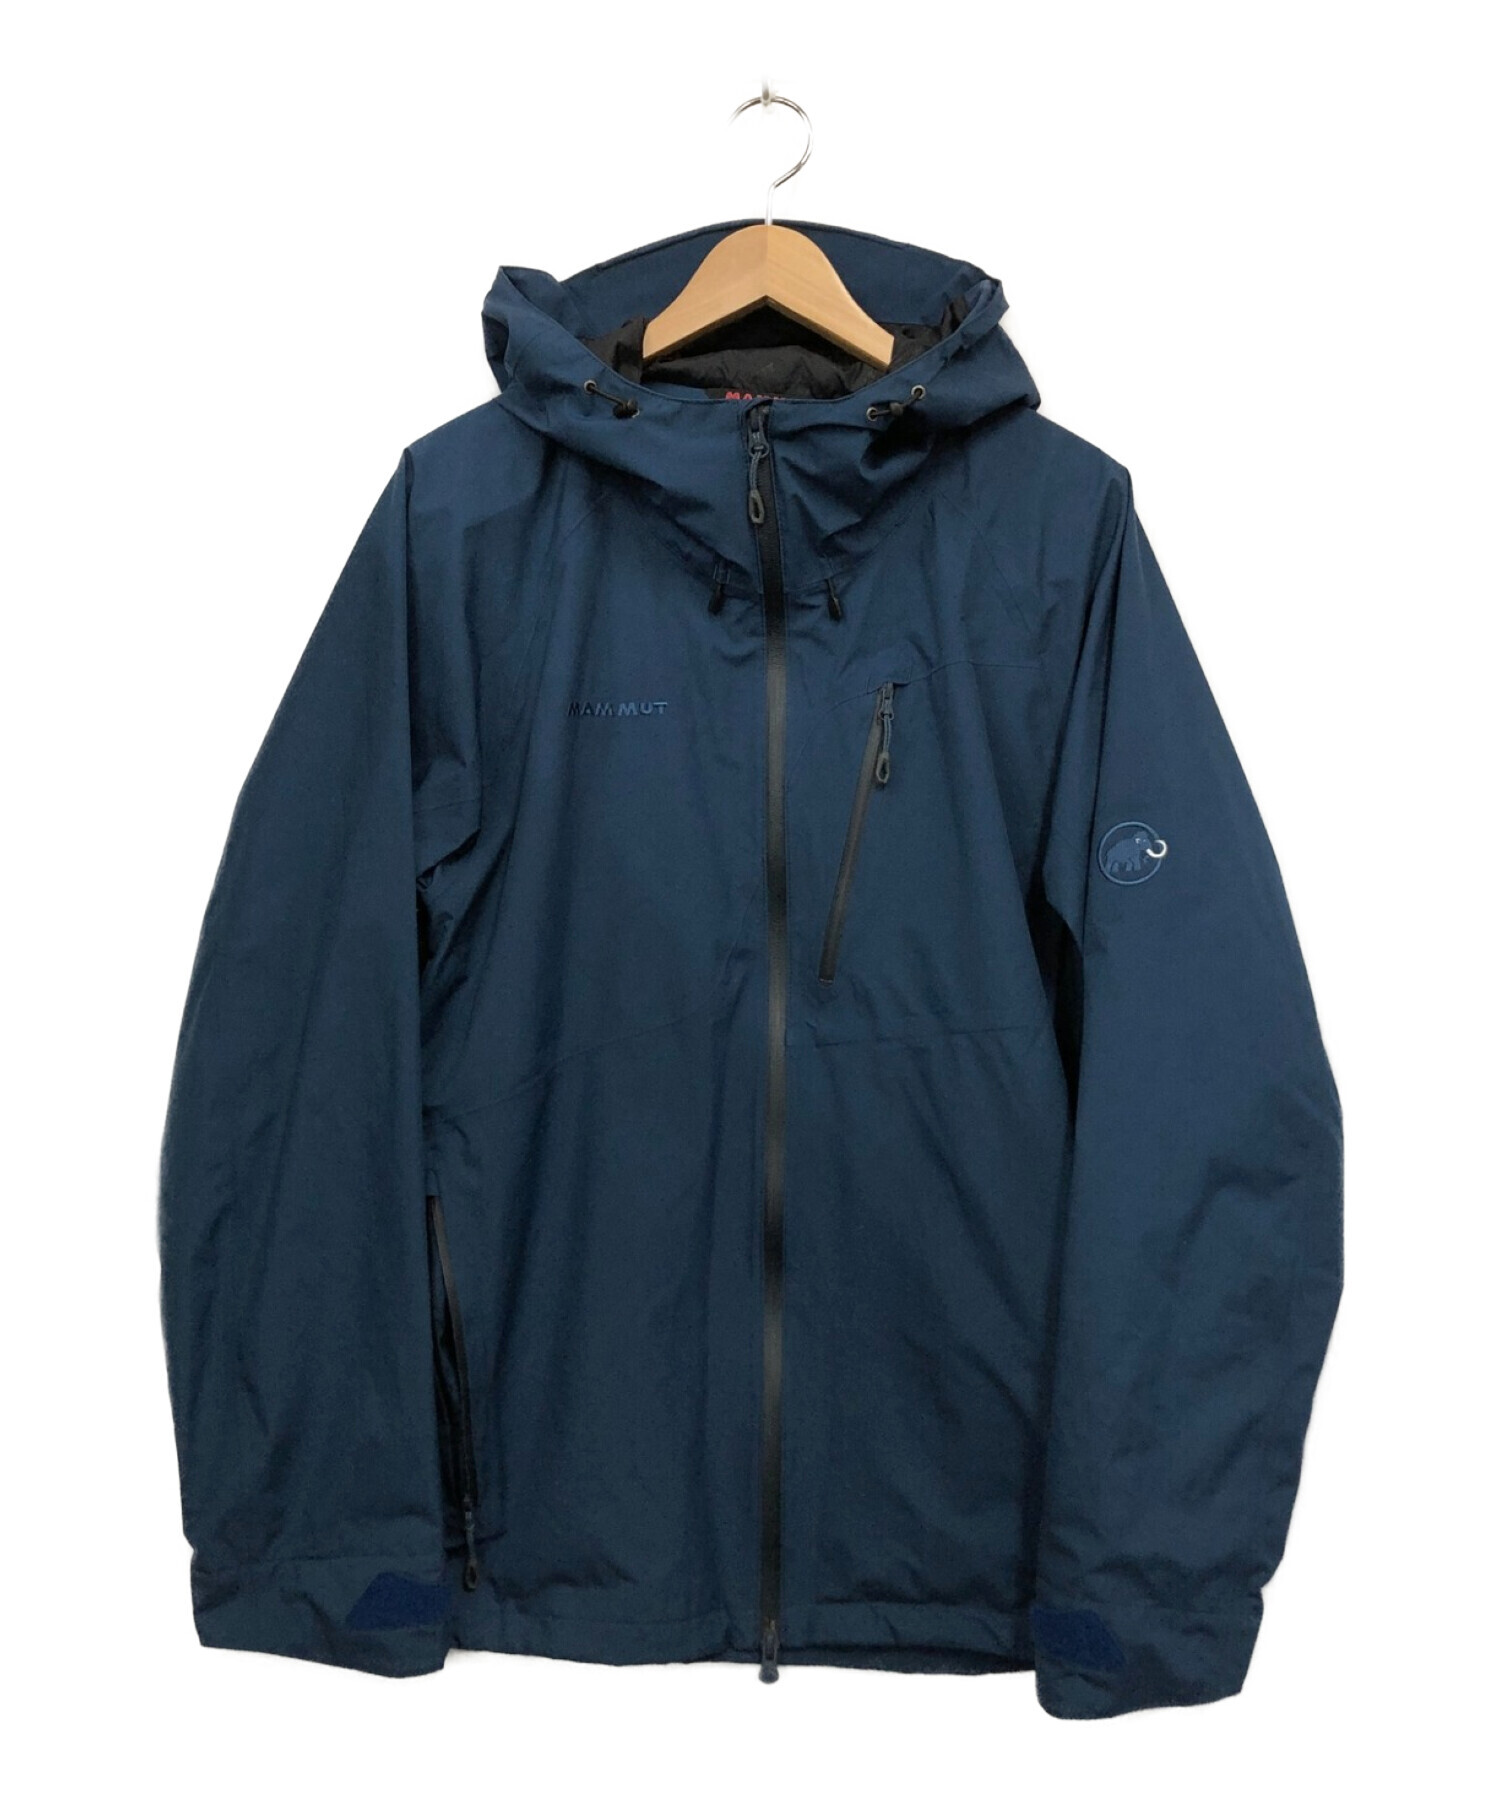 【H】マムート★GORE-TEX ALL WEATHER Jacket★XL